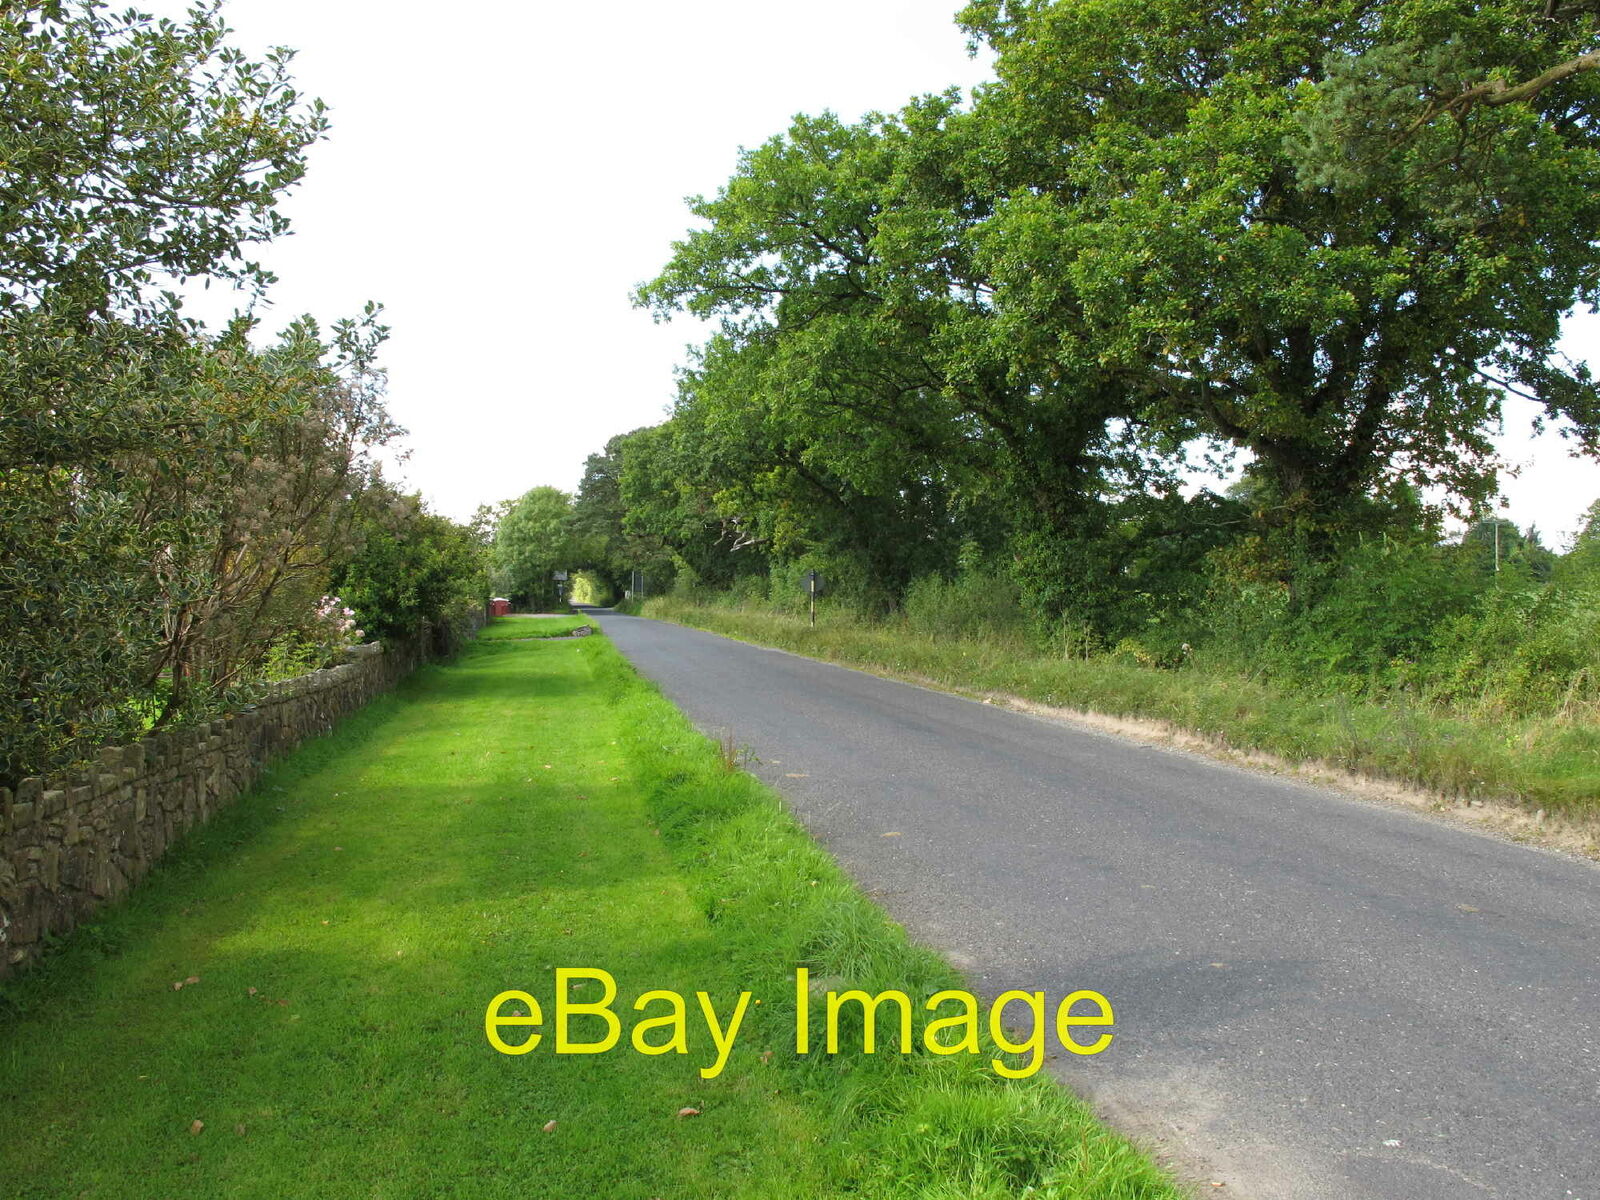 Photo 12x8 Road - R471 to Sixmilebridge View from Junction with R463. c2010